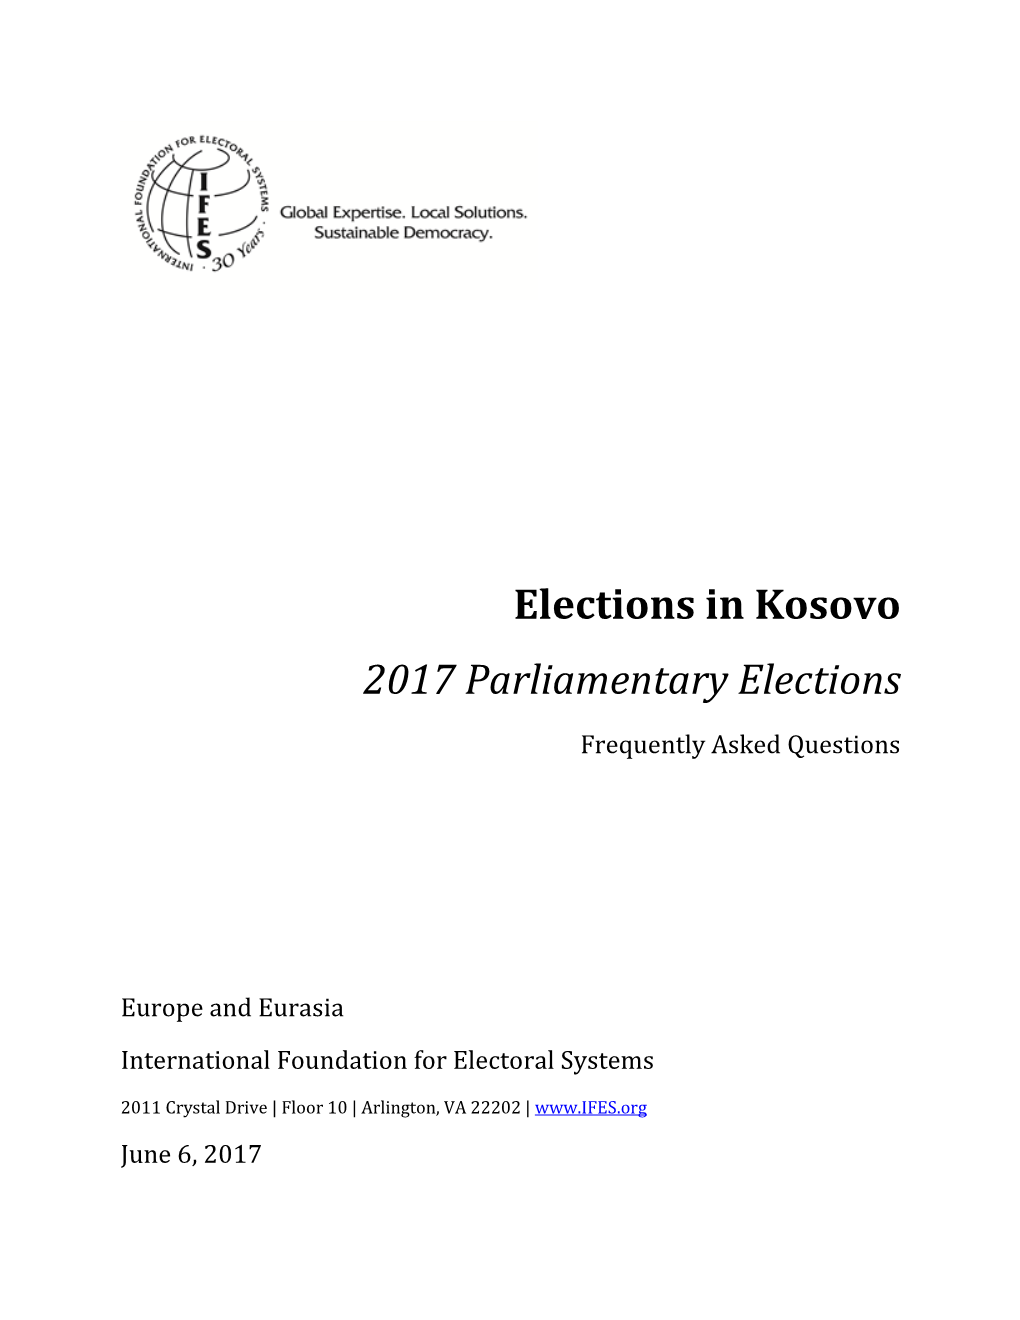 Elections in Kosovo: 2017 Parliamentary Elections Frequently Asked Questions